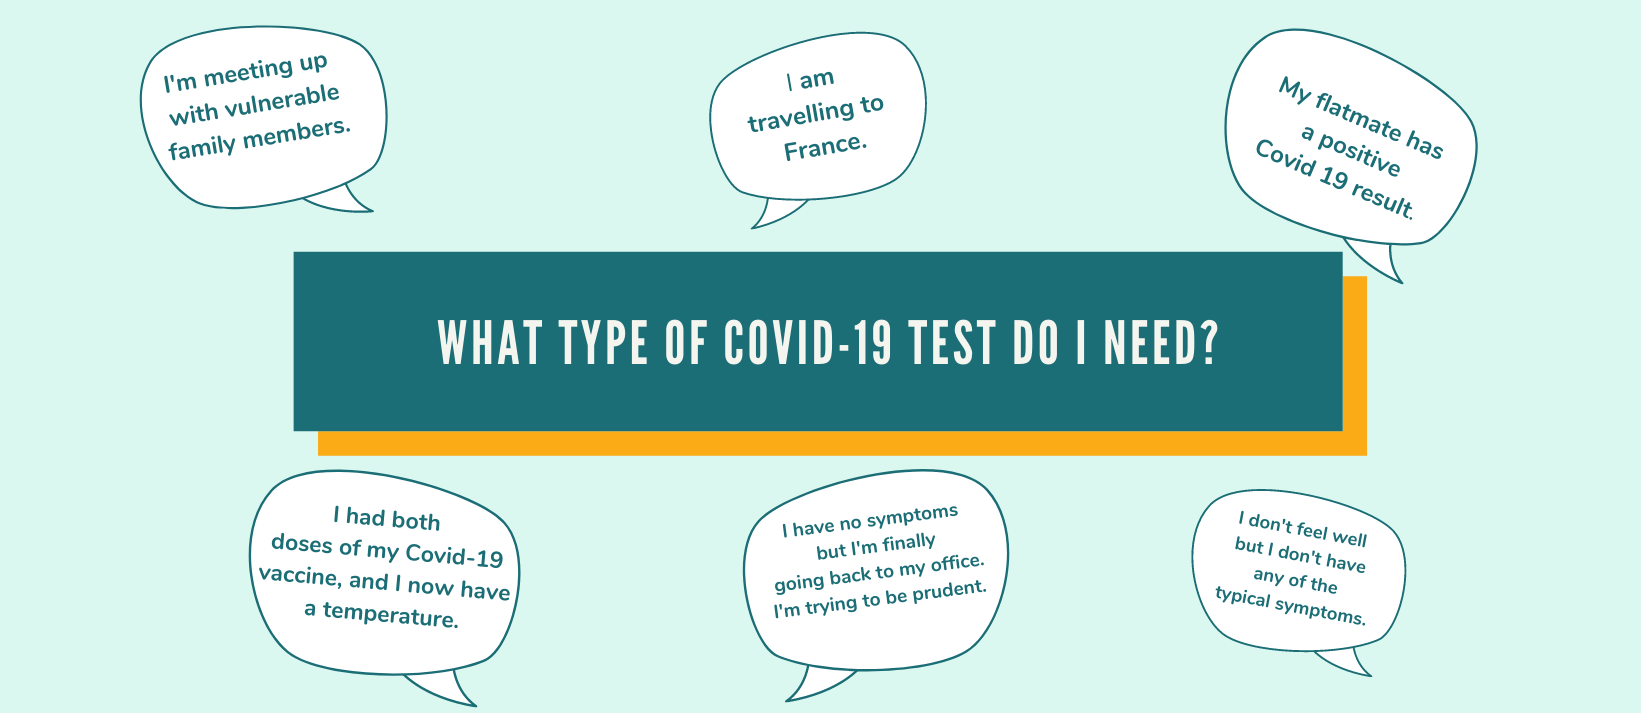 What type of Covid test do I need